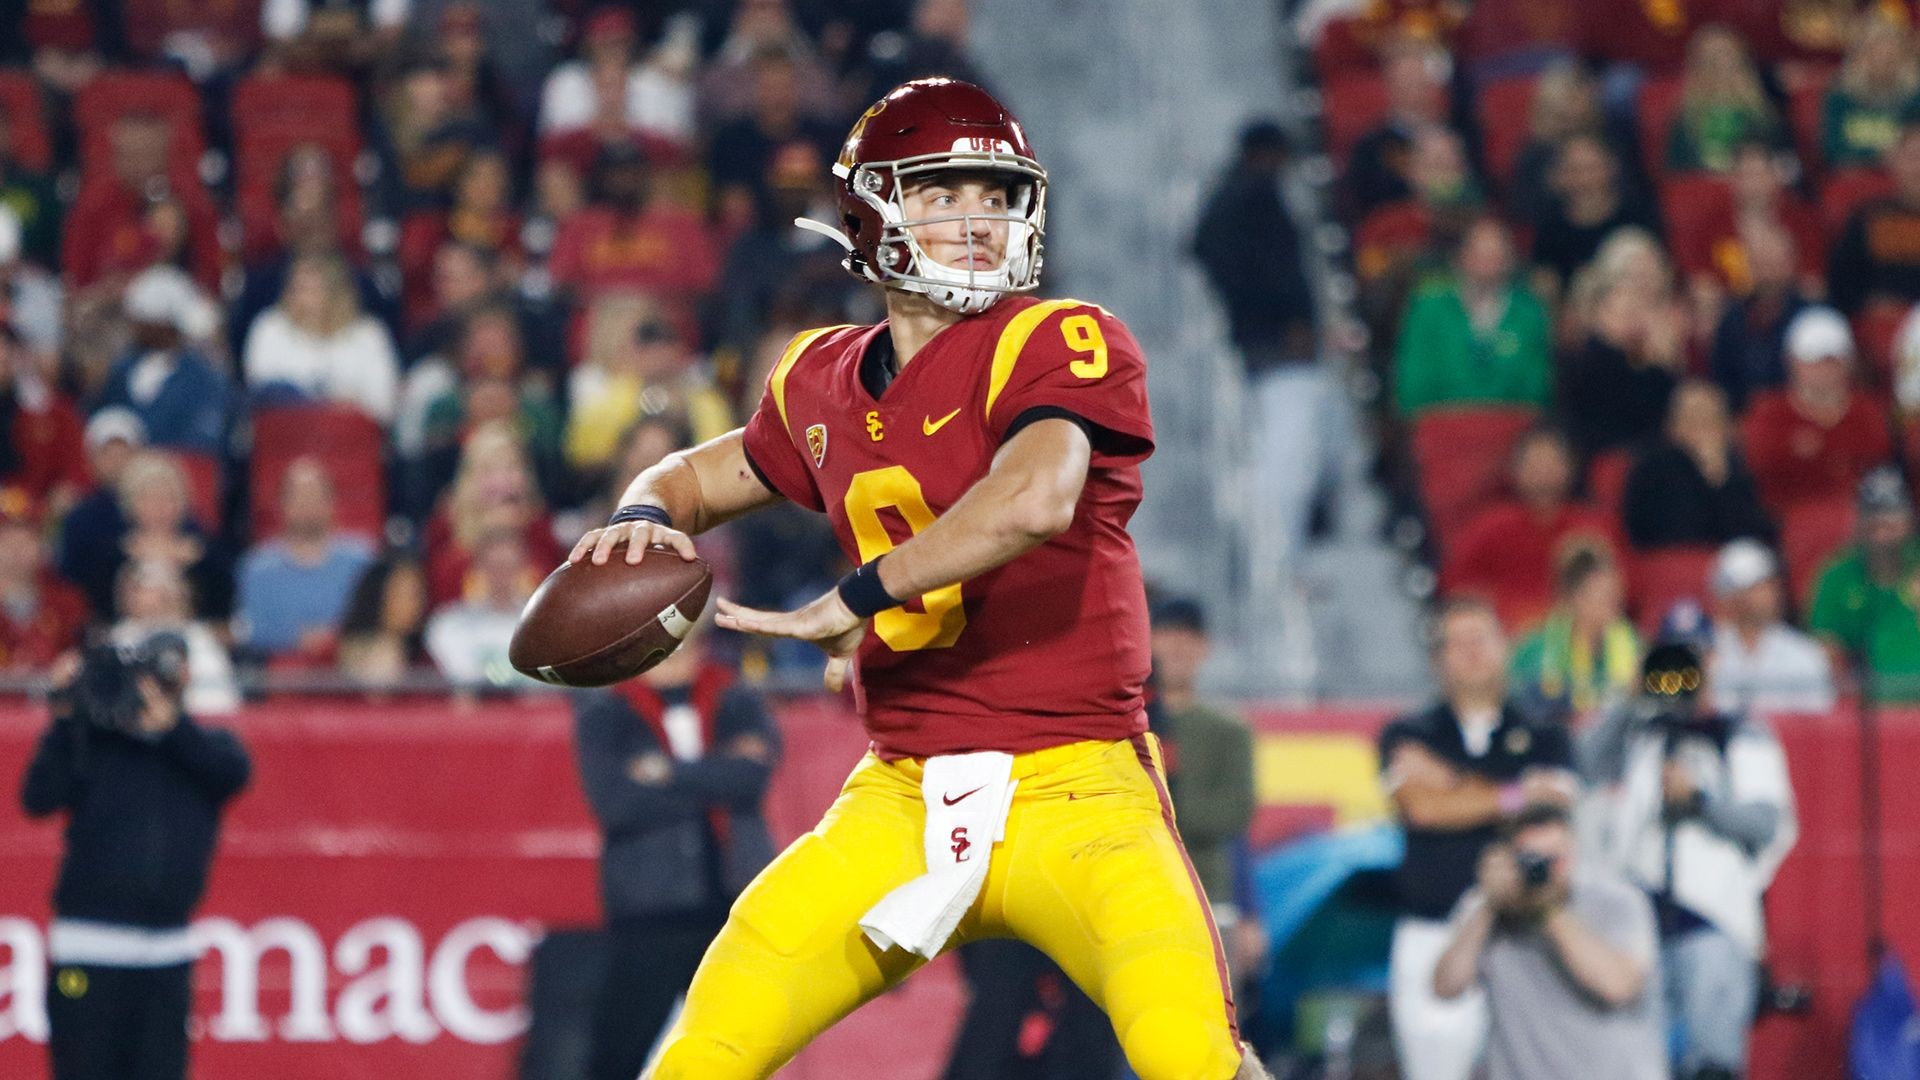 USC vs. ASU preview 2019 Which units have the edge?